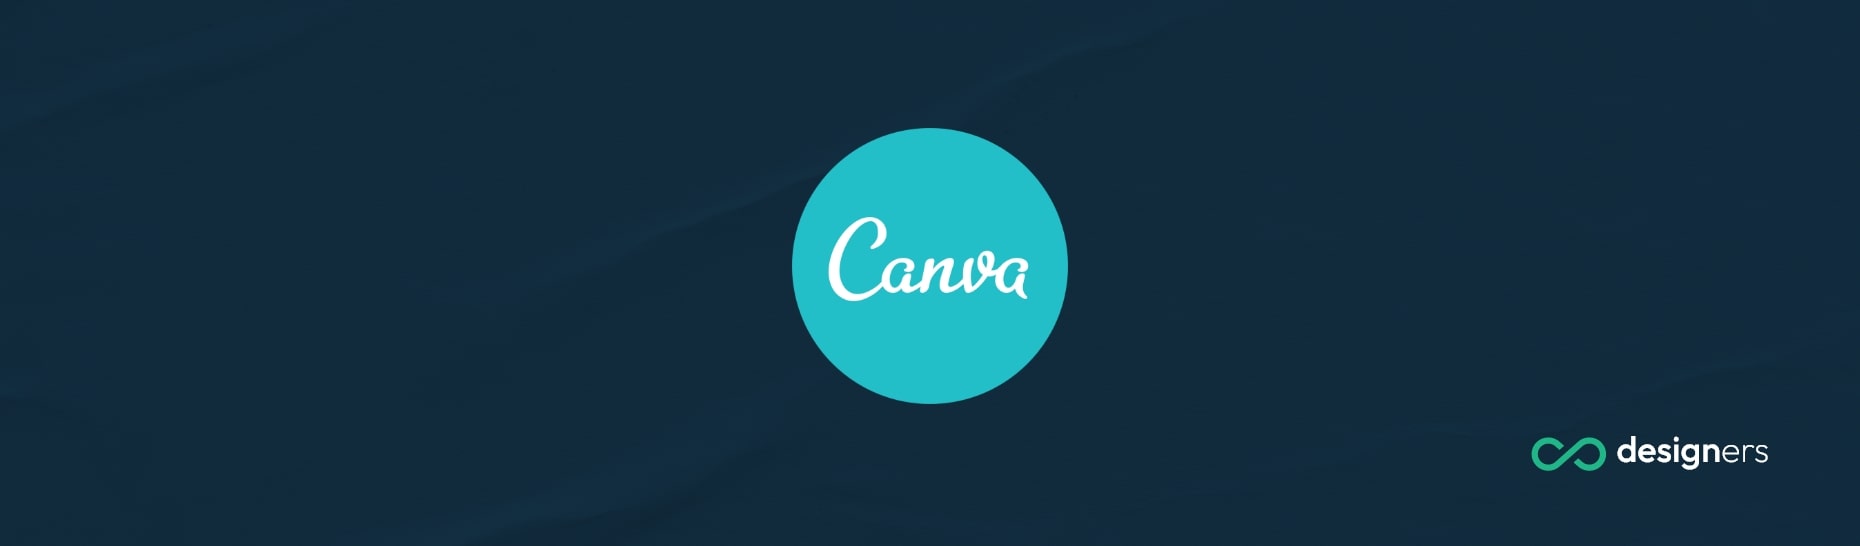 What Is Canva Used For?